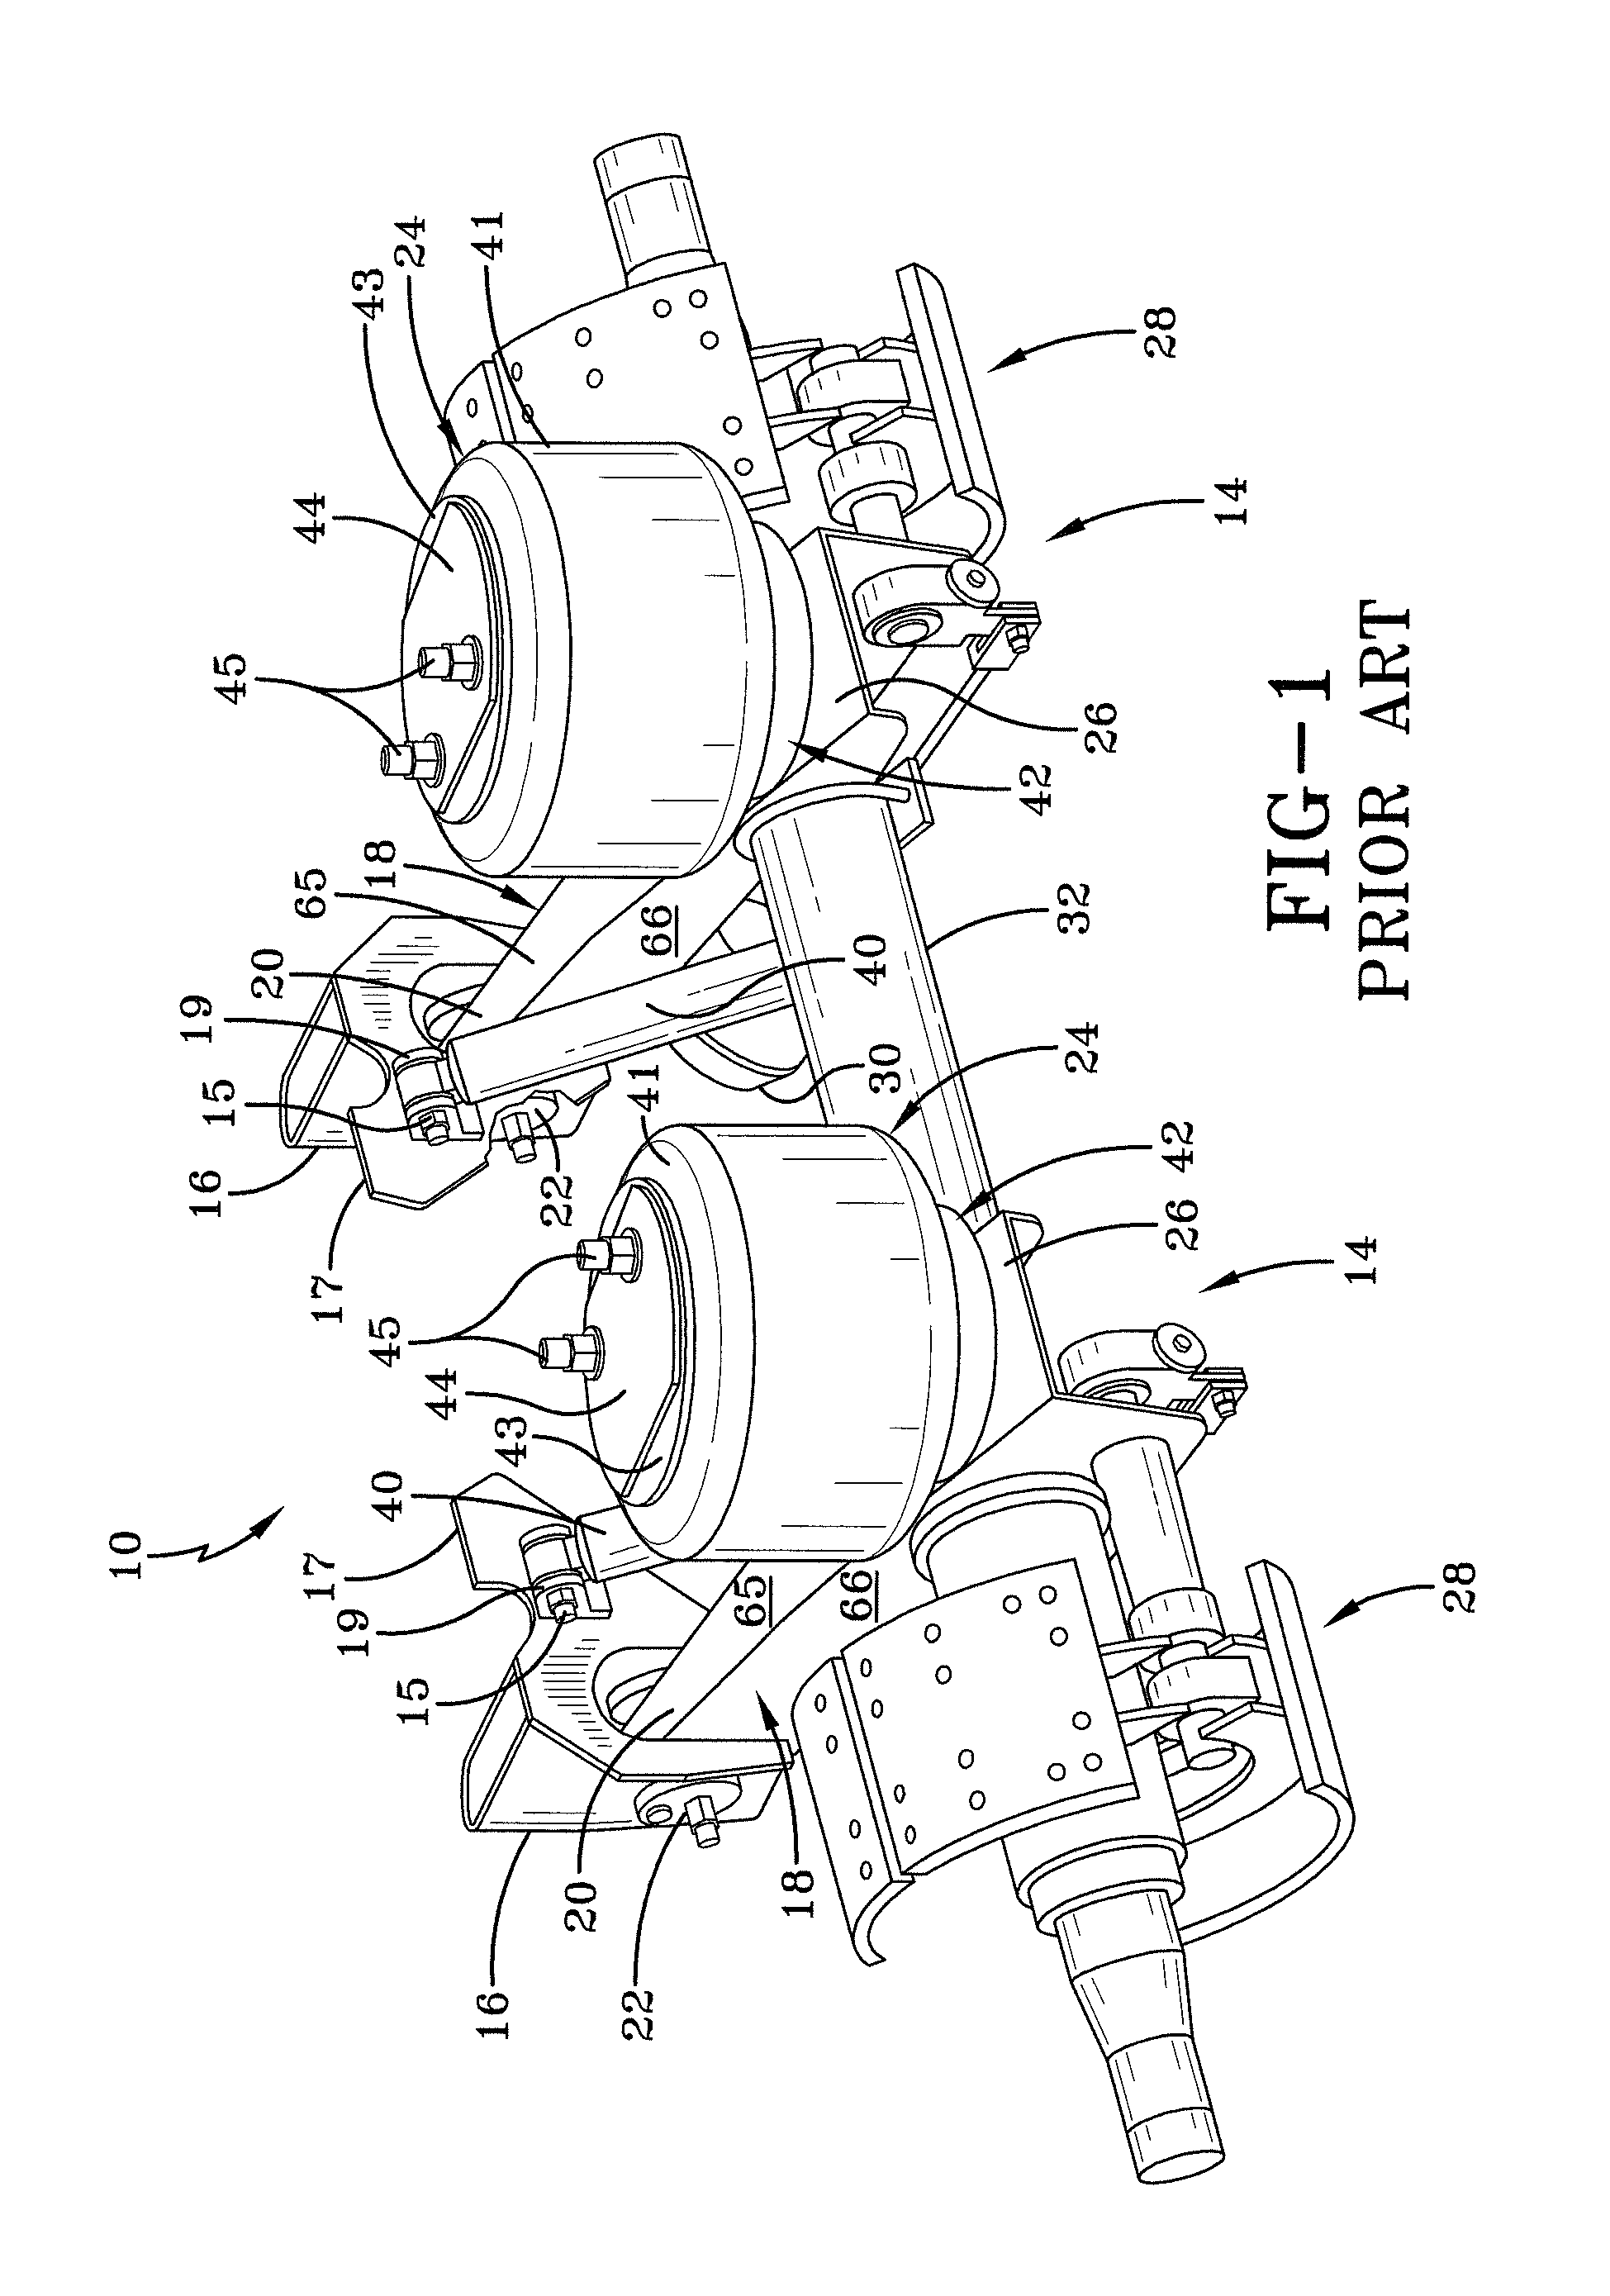 Mechanical stop for axle/suspension systems